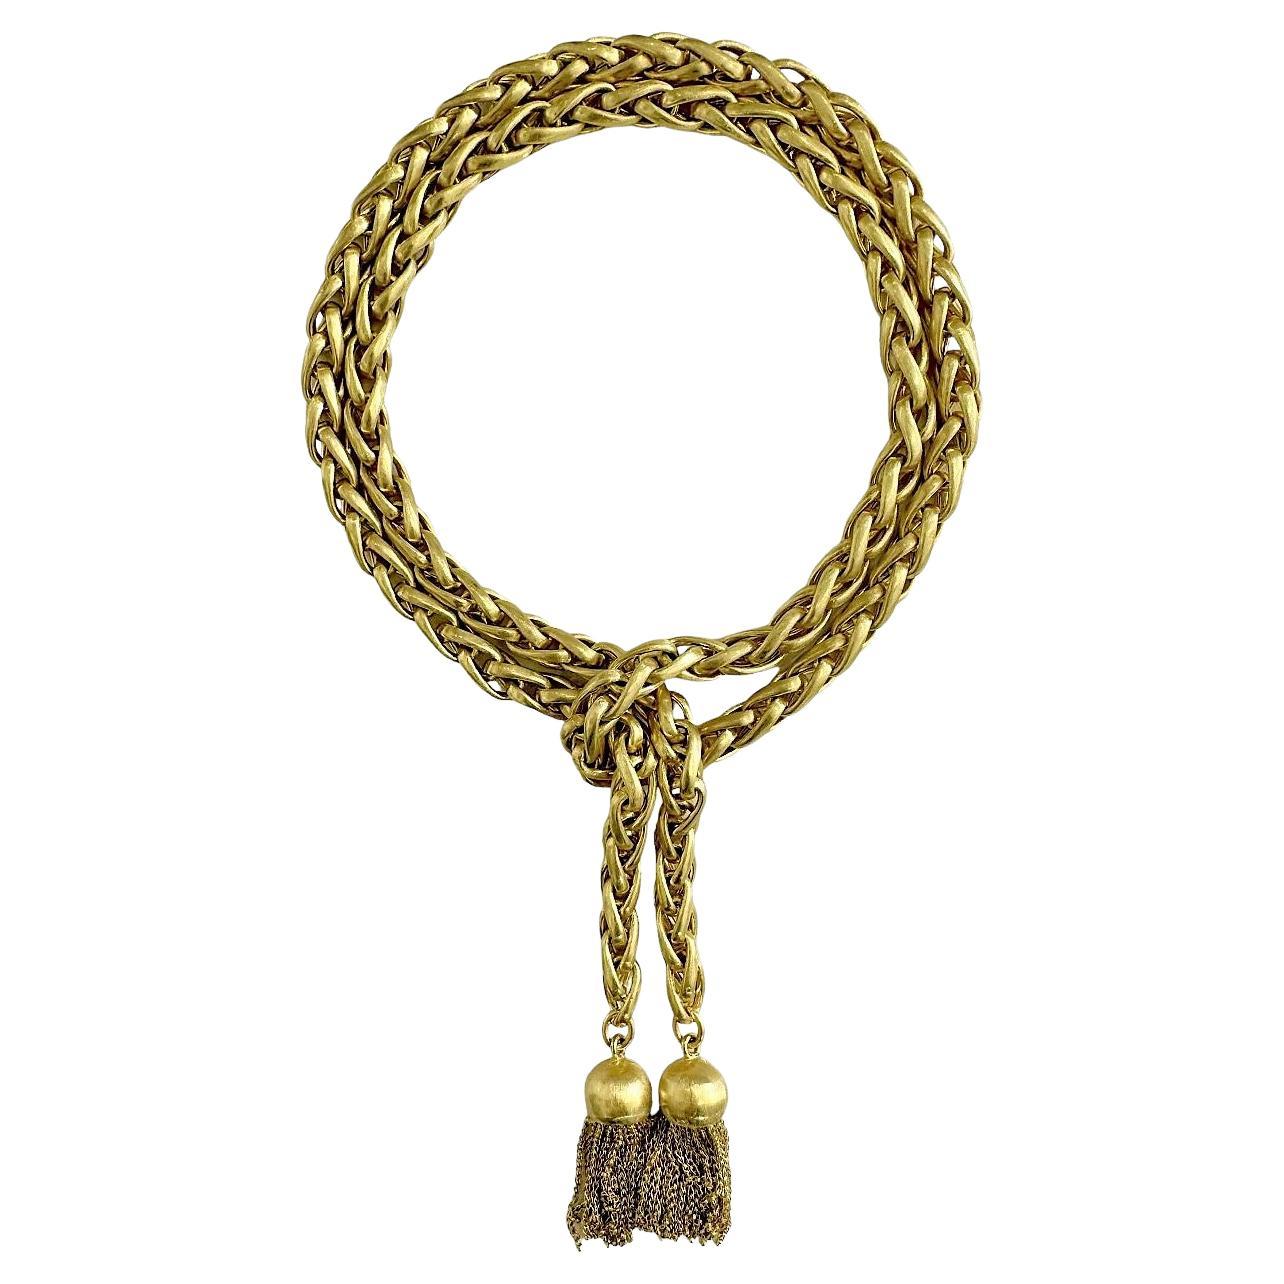 This wonderful vintage wheat chain link Lariat necklace is the personification of 